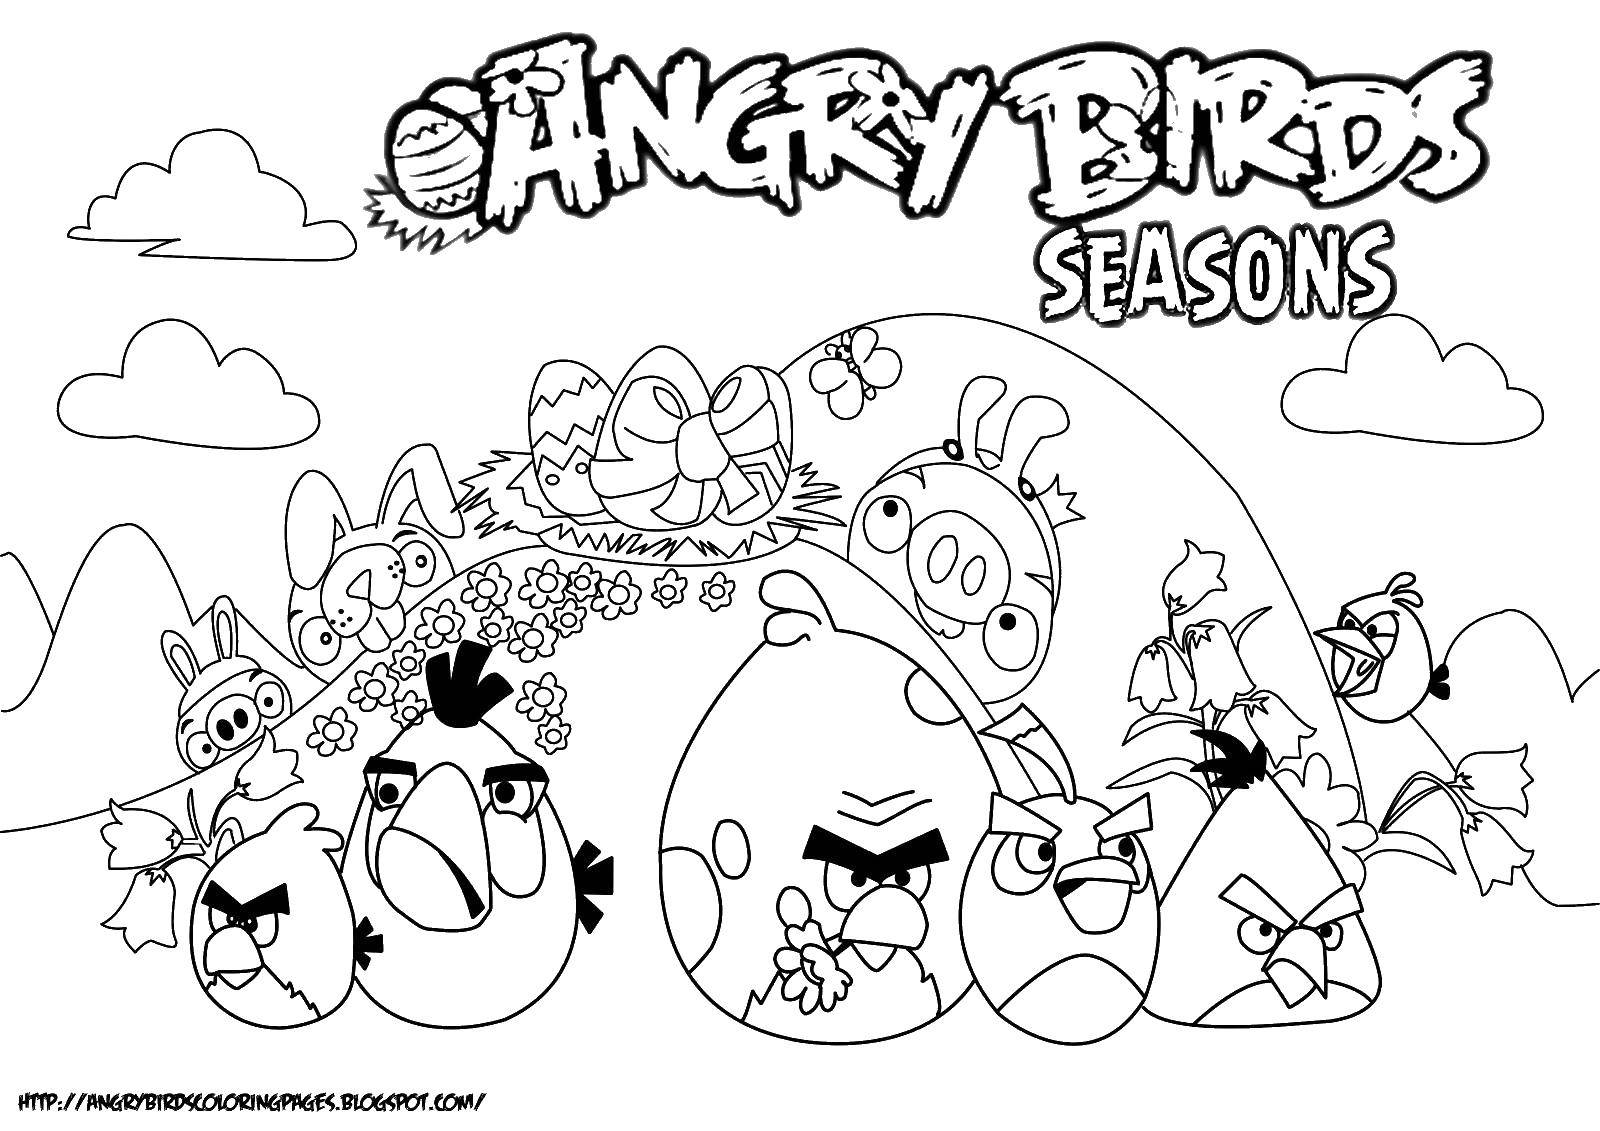 Coloring Season angry birds. Category angry birds. Tags:  angry birds, birds, games.